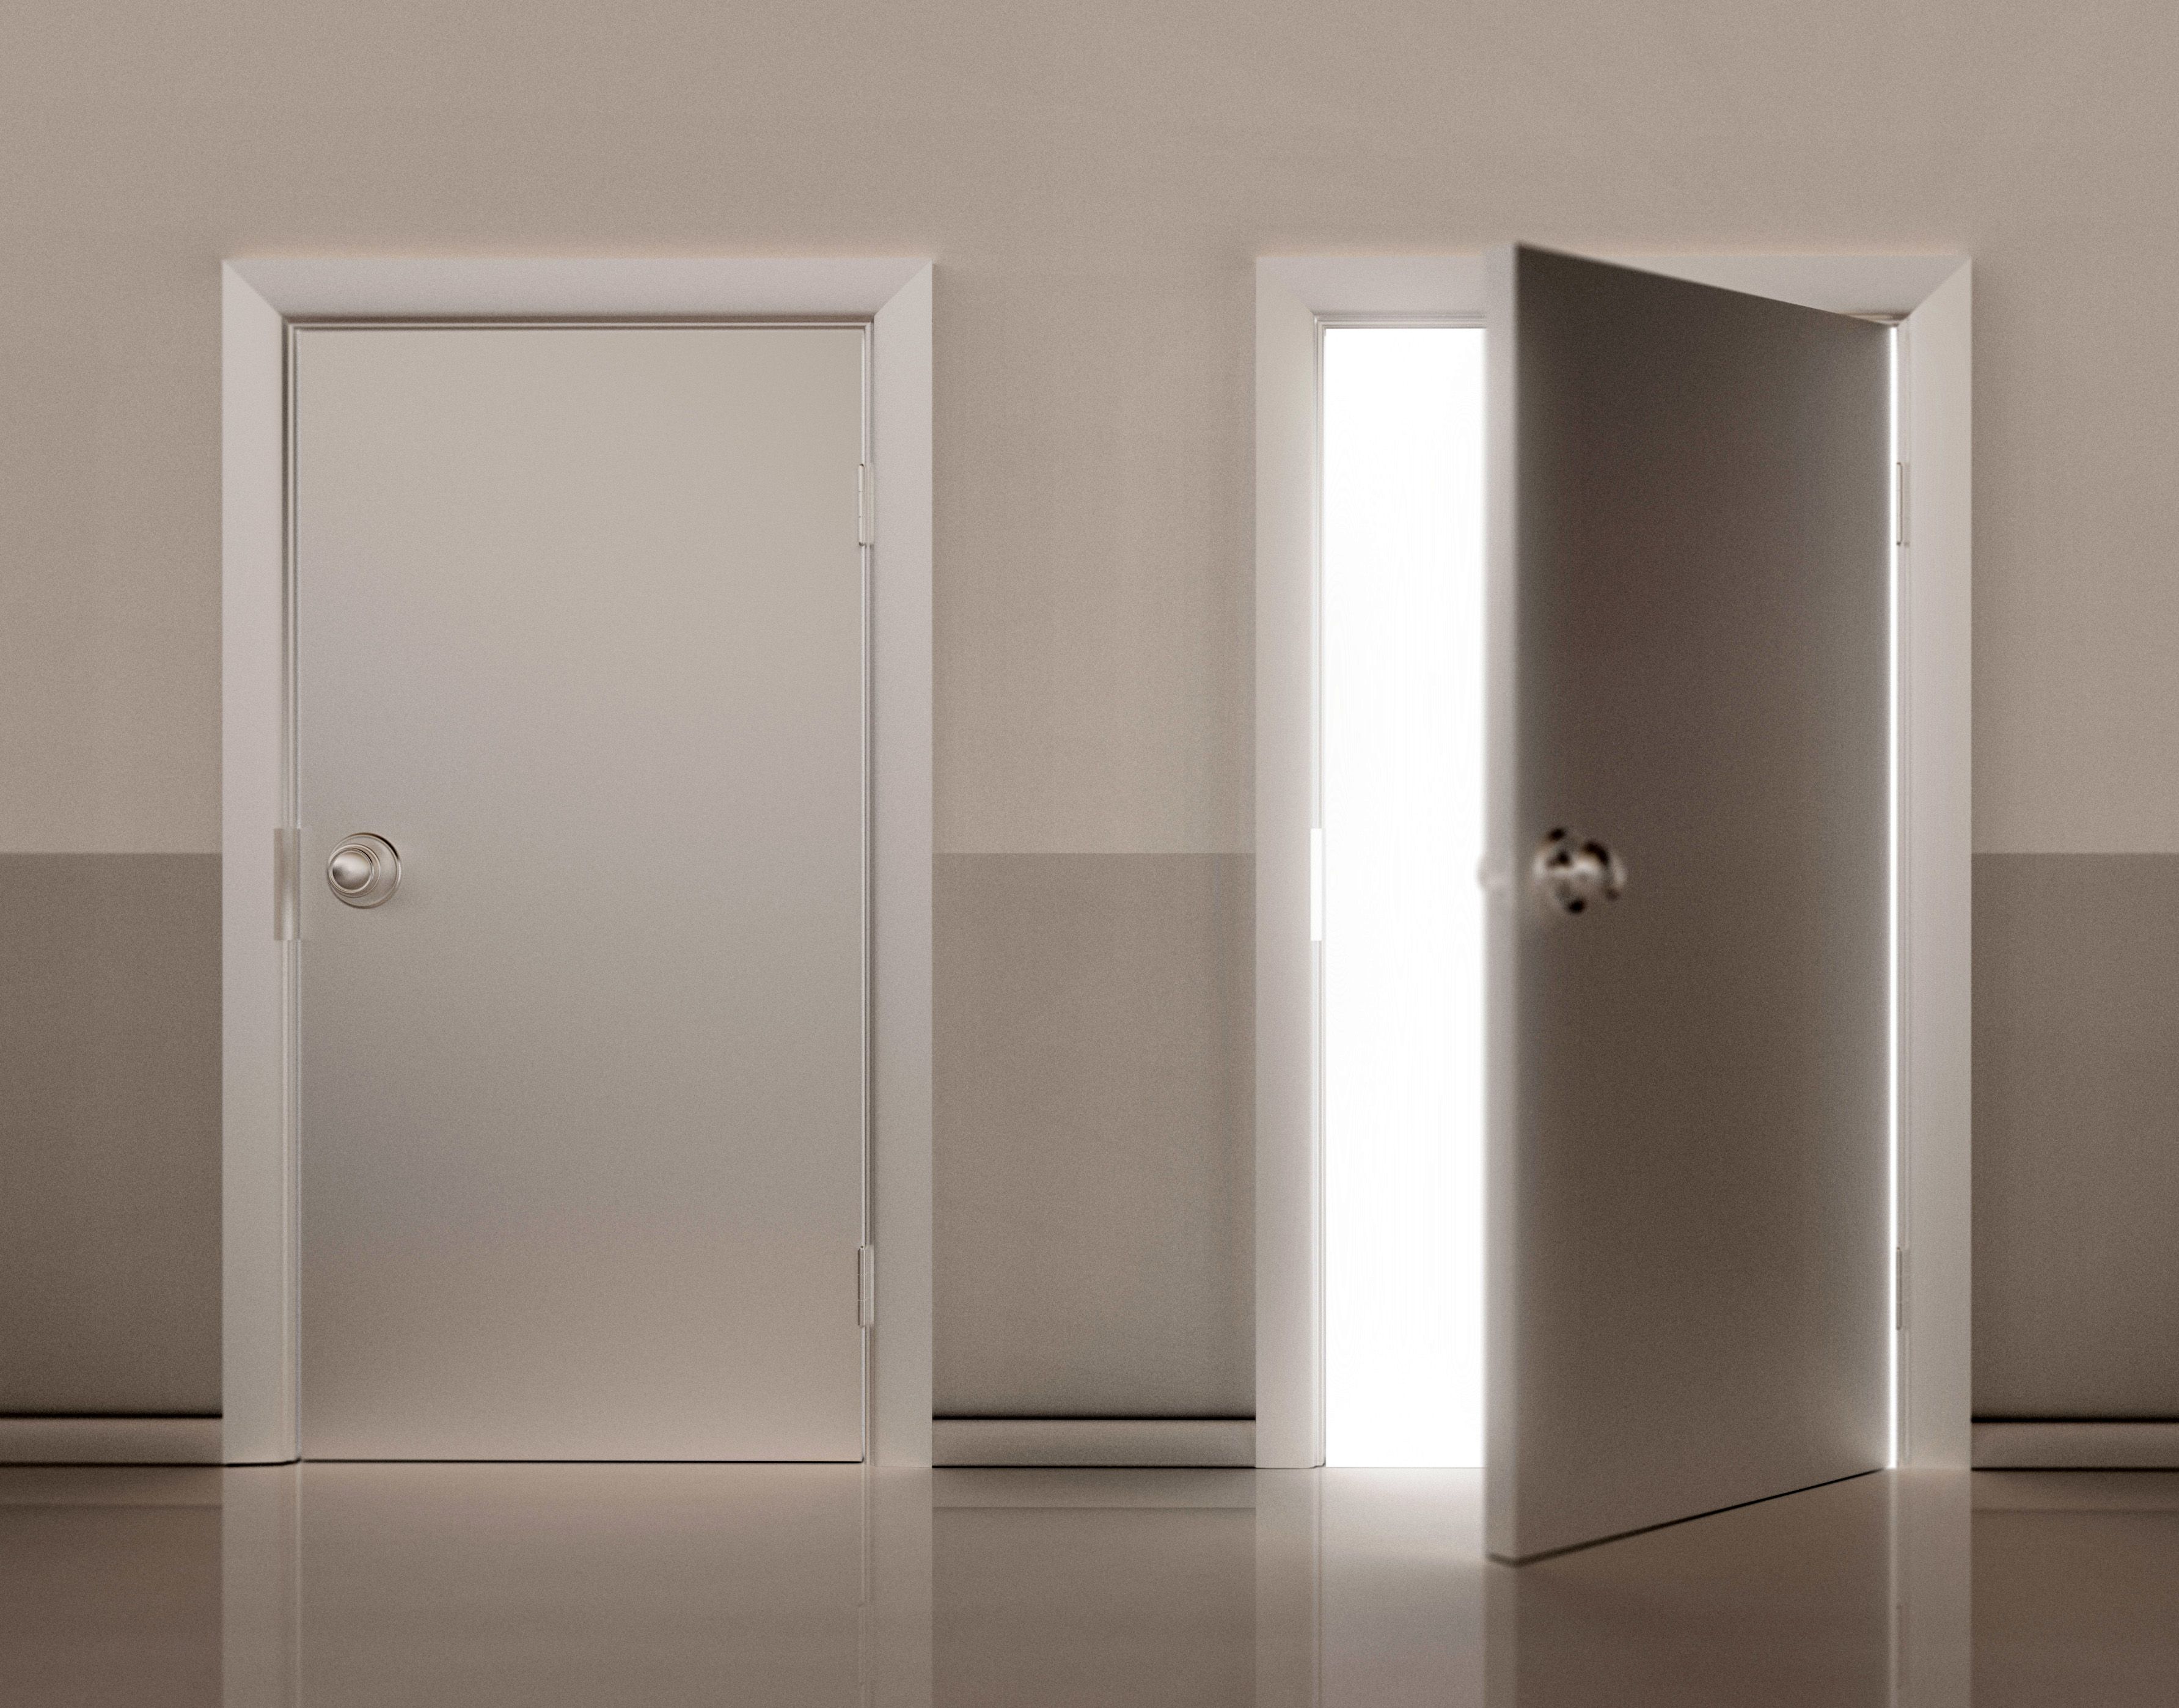 The “Opening the Door” Fallacy | CEBblog™